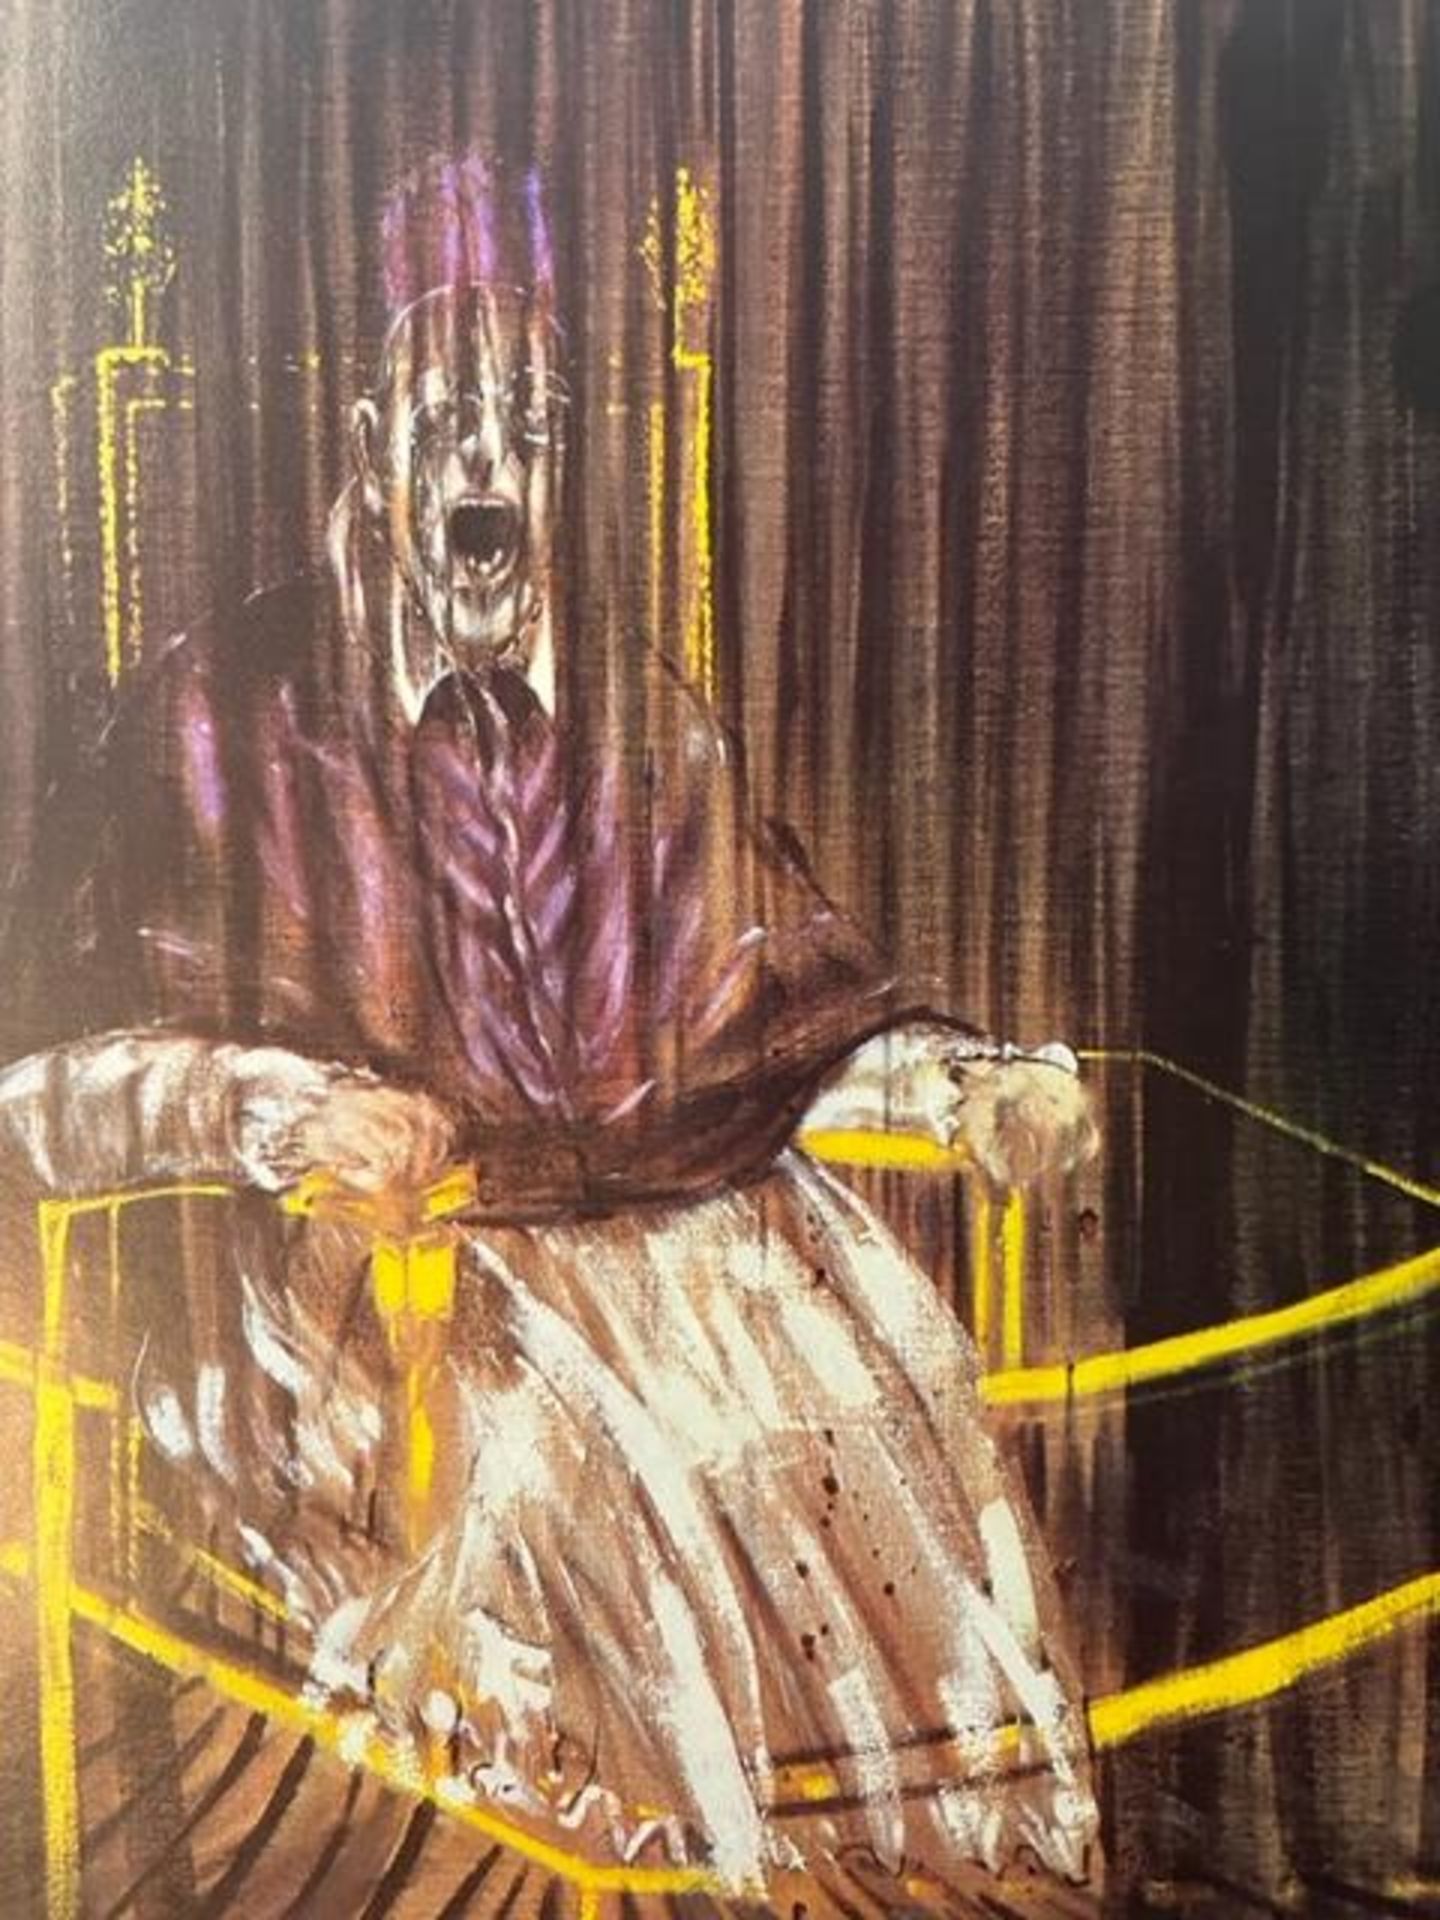 Francis Bacon "Study after Velazques's Portrait of Pope Innocent X" Print. - Image 2 of 6